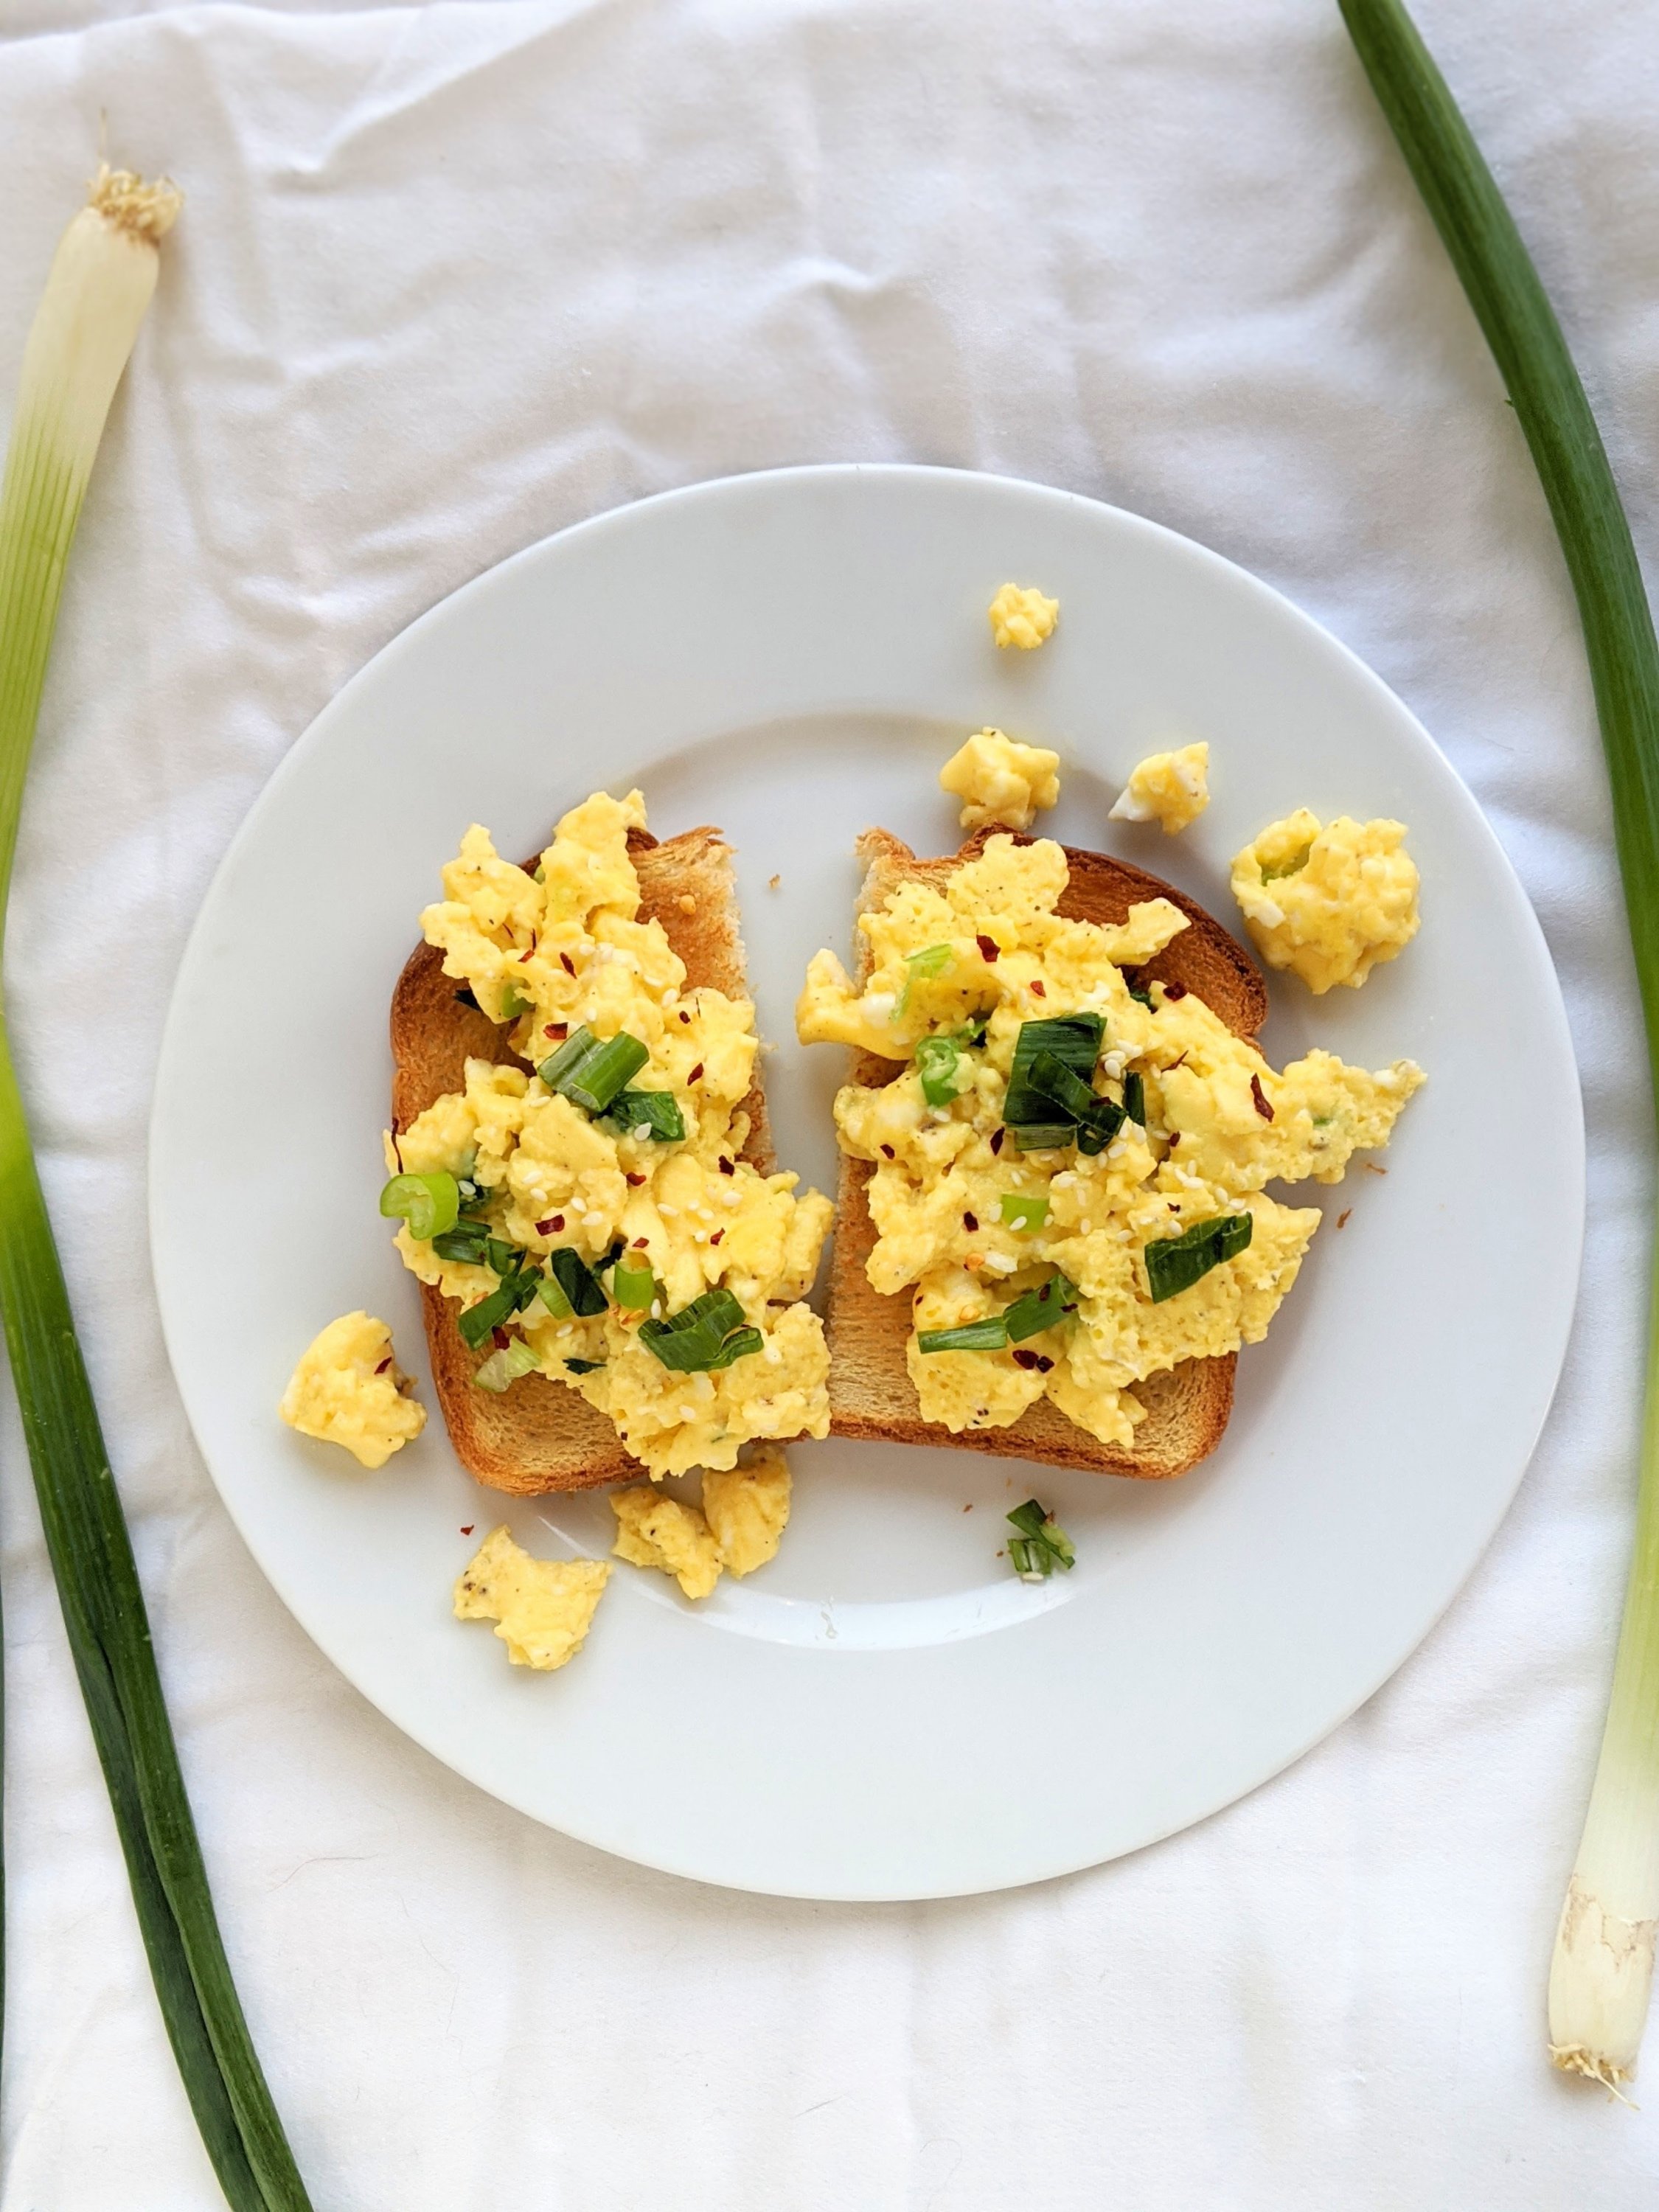 scrambled eggs without milk green onion eggs with red chili flakes eggs with sour cream yogurt almond milk or ricotta cheese